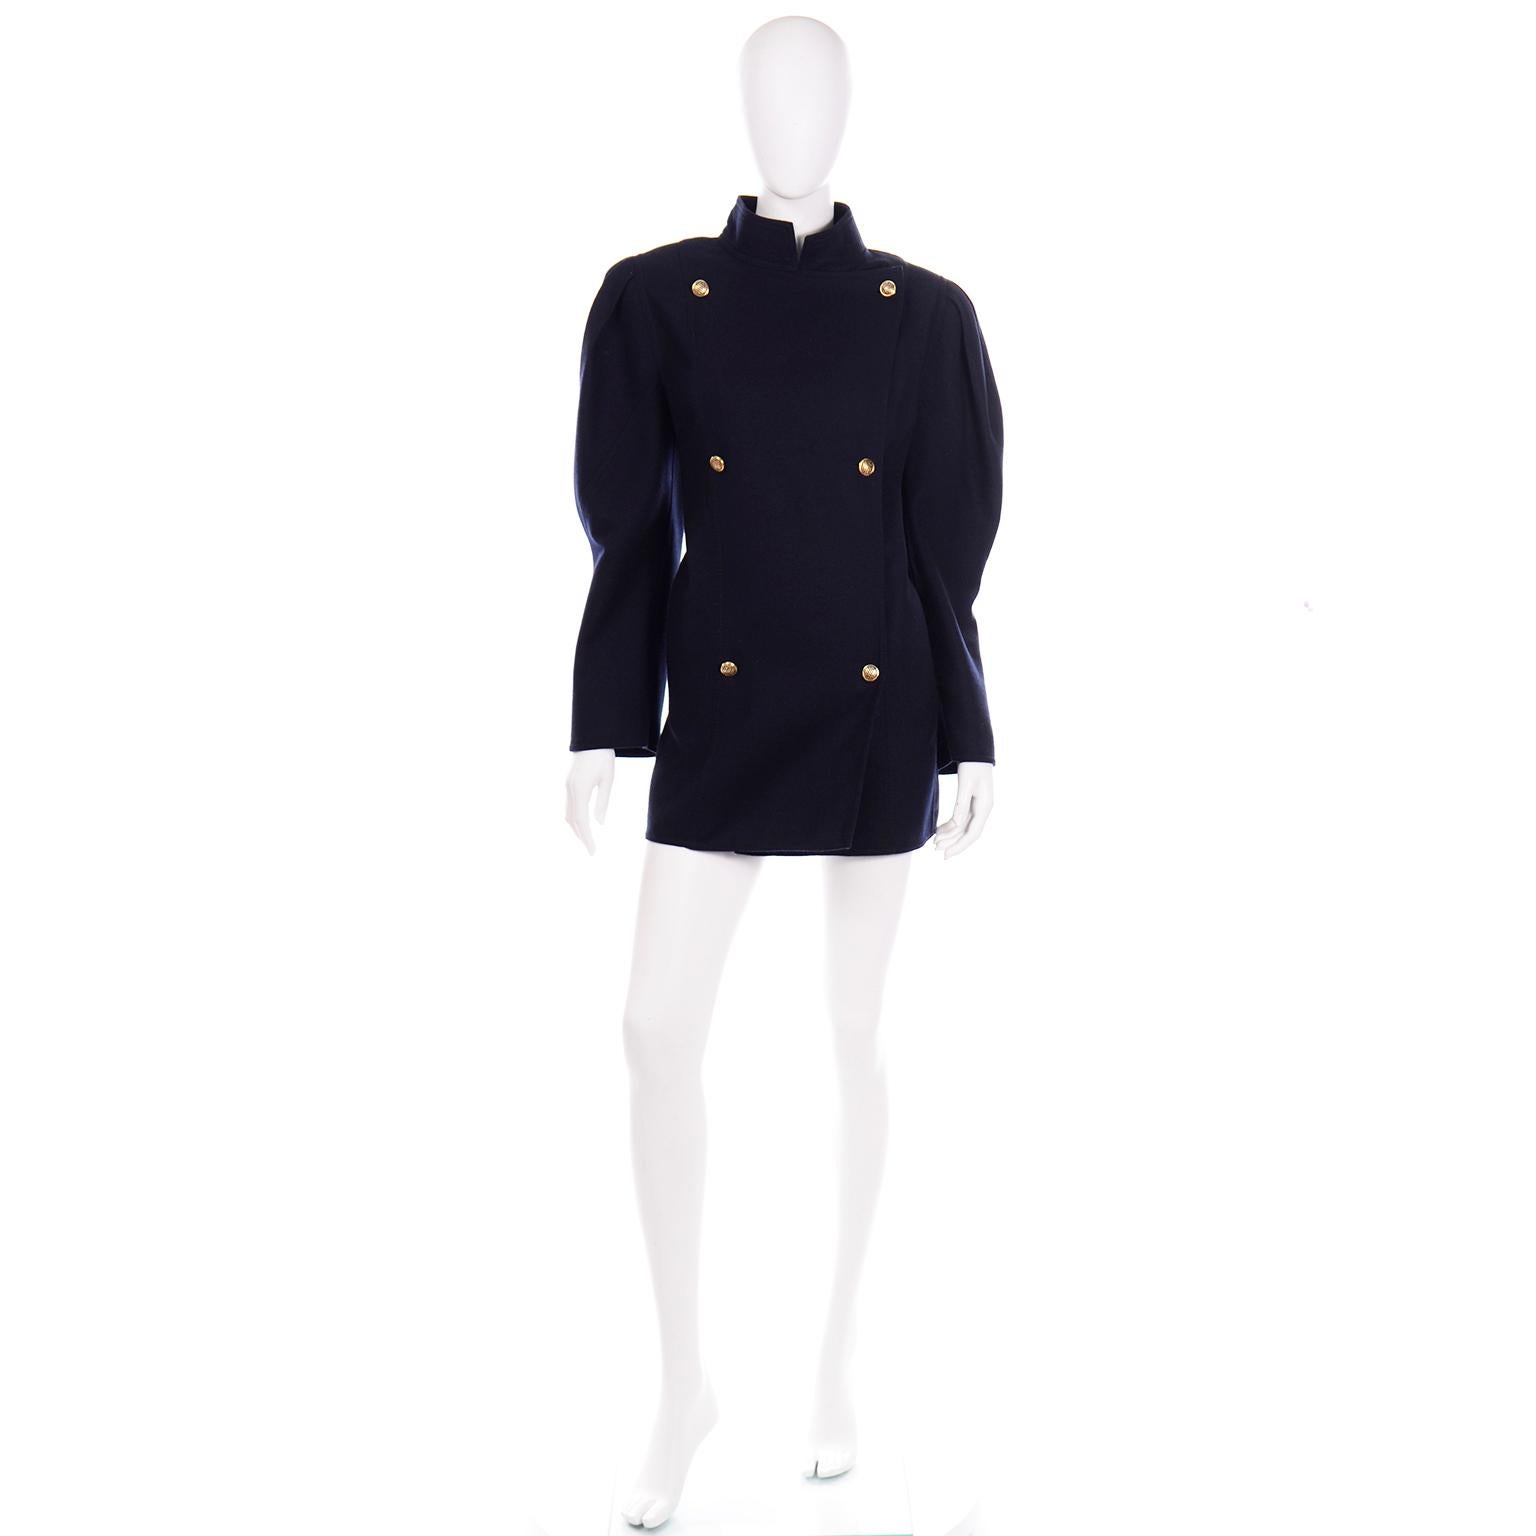 This is a fabulous midnight navy blue Louis Féraud military style coat with dramatic sleeves and unique chain link gold tone buttons. The shoulders of this great jacket are structured with shoulder pads and the box pleats at the seams give a